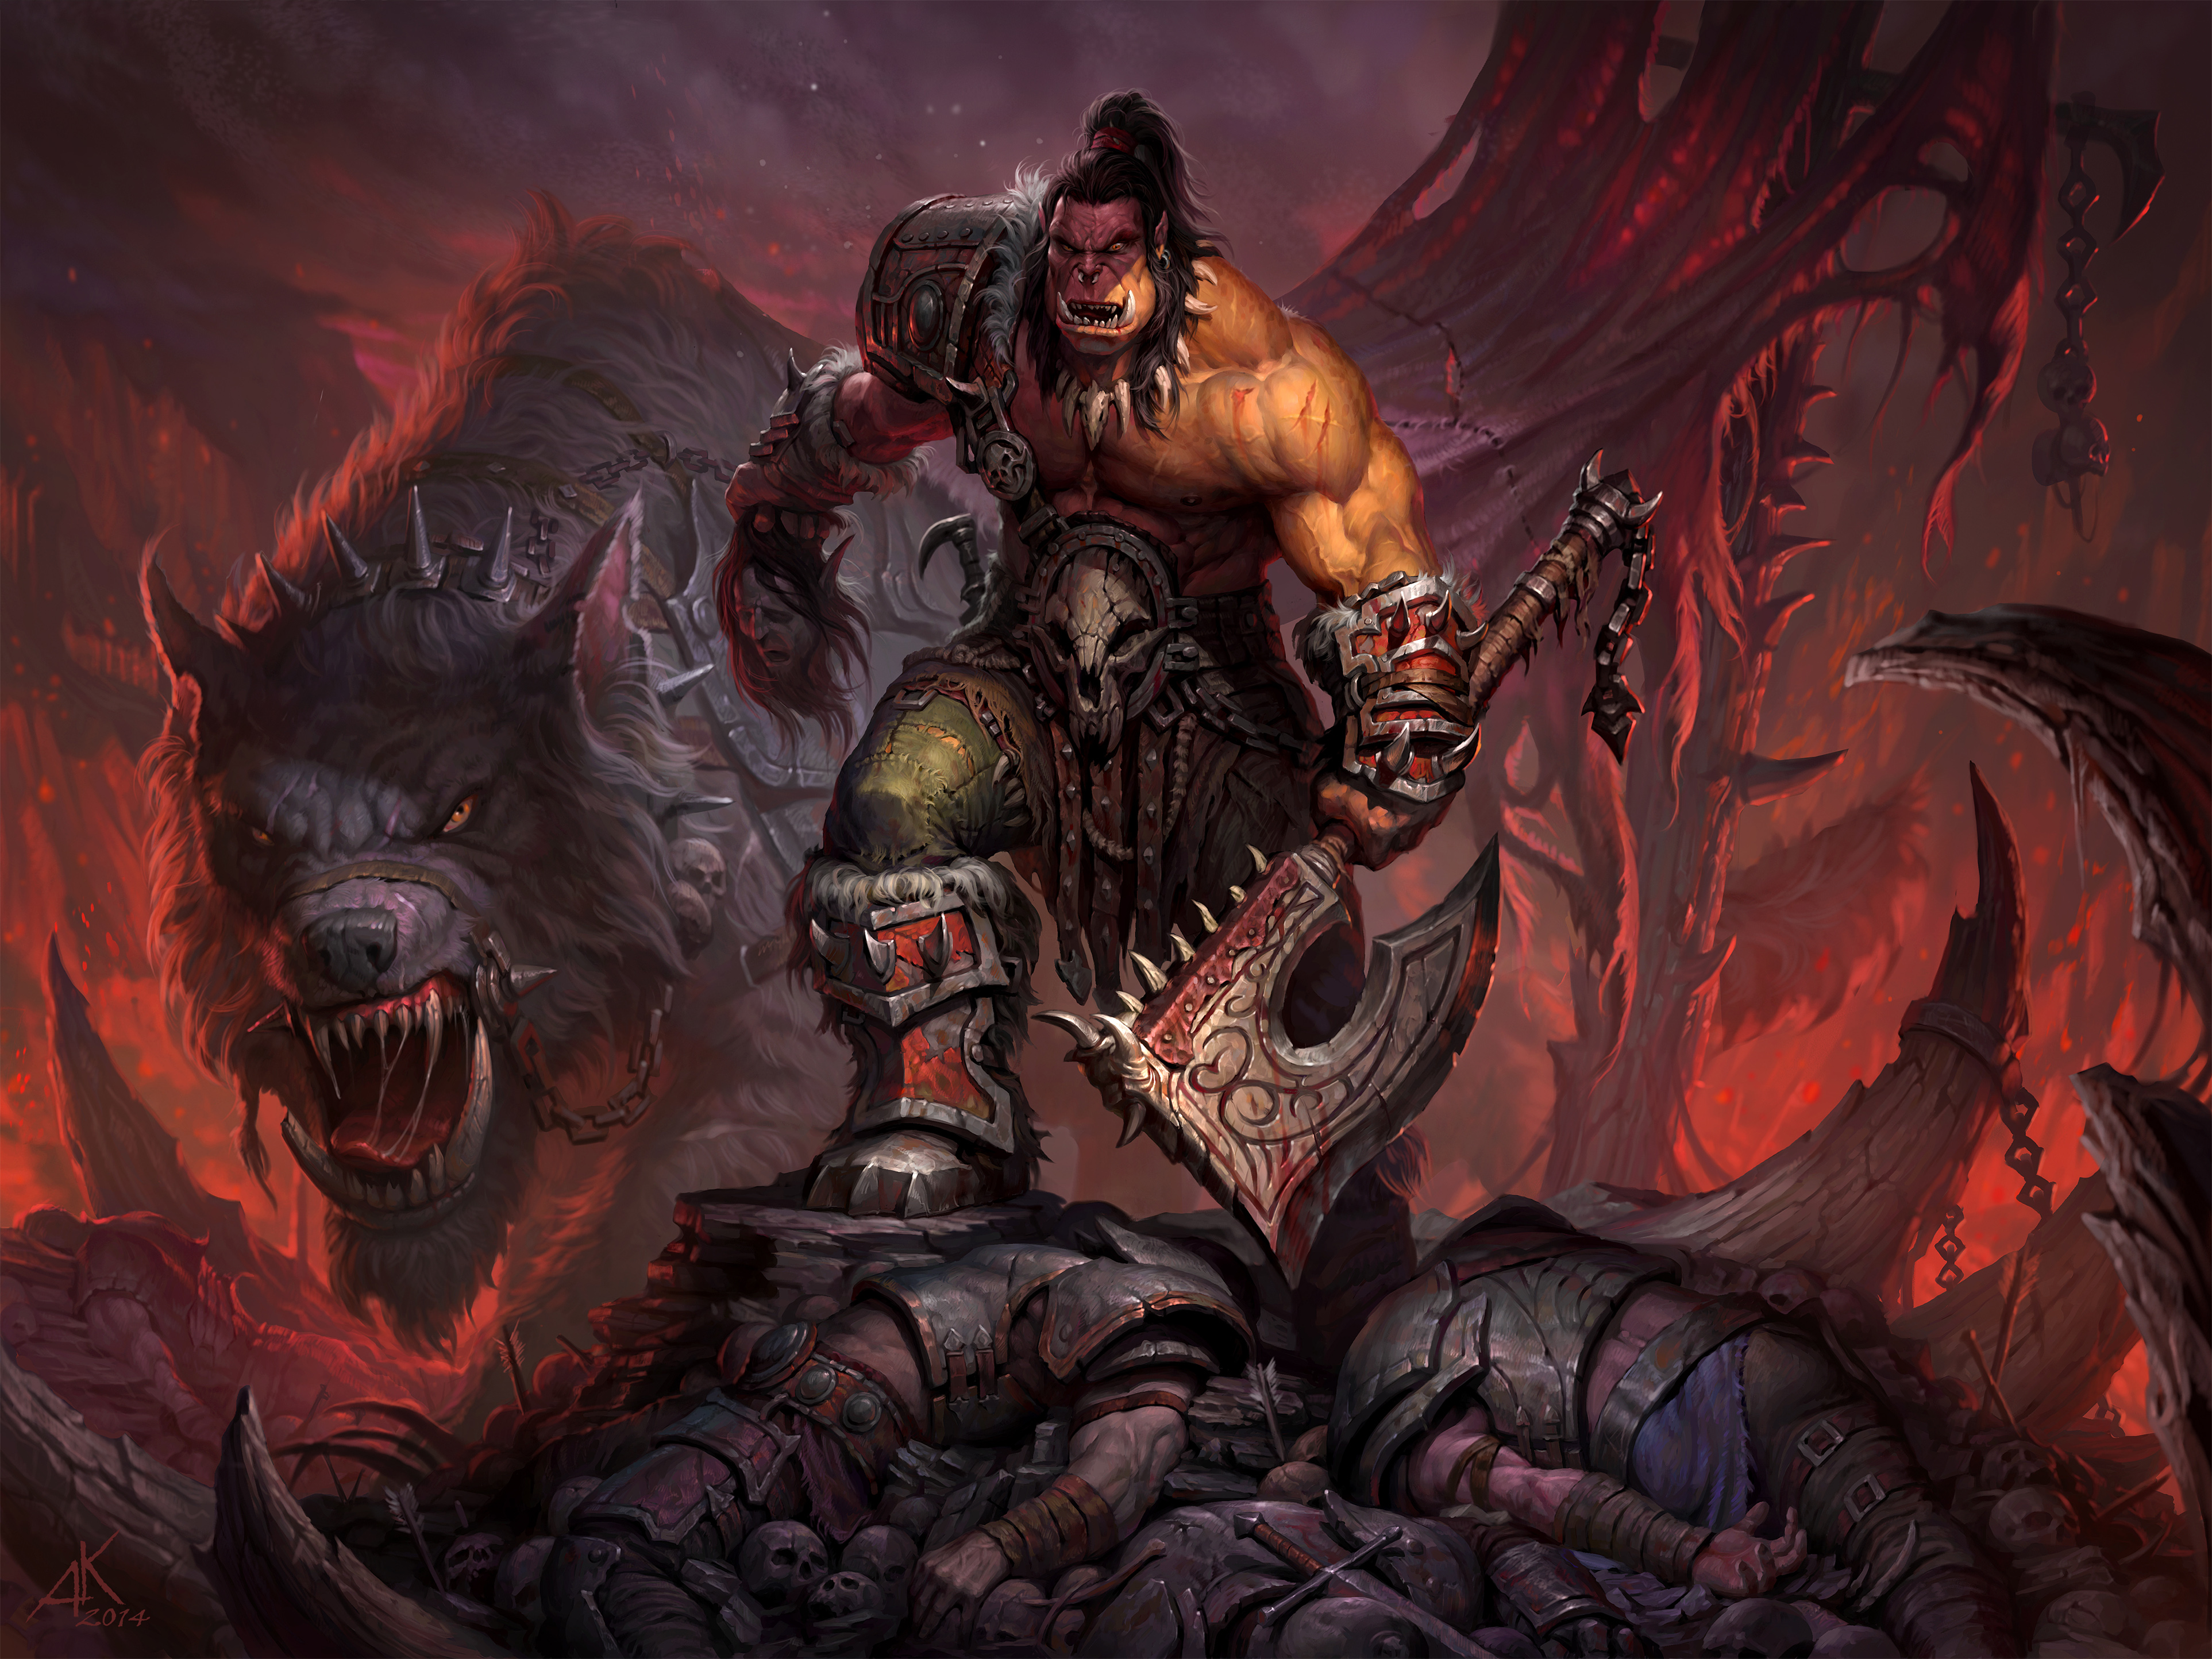 HQ World Of Warcraft: Warlords Of Draenor Wallpapers | File 3174.28Kb